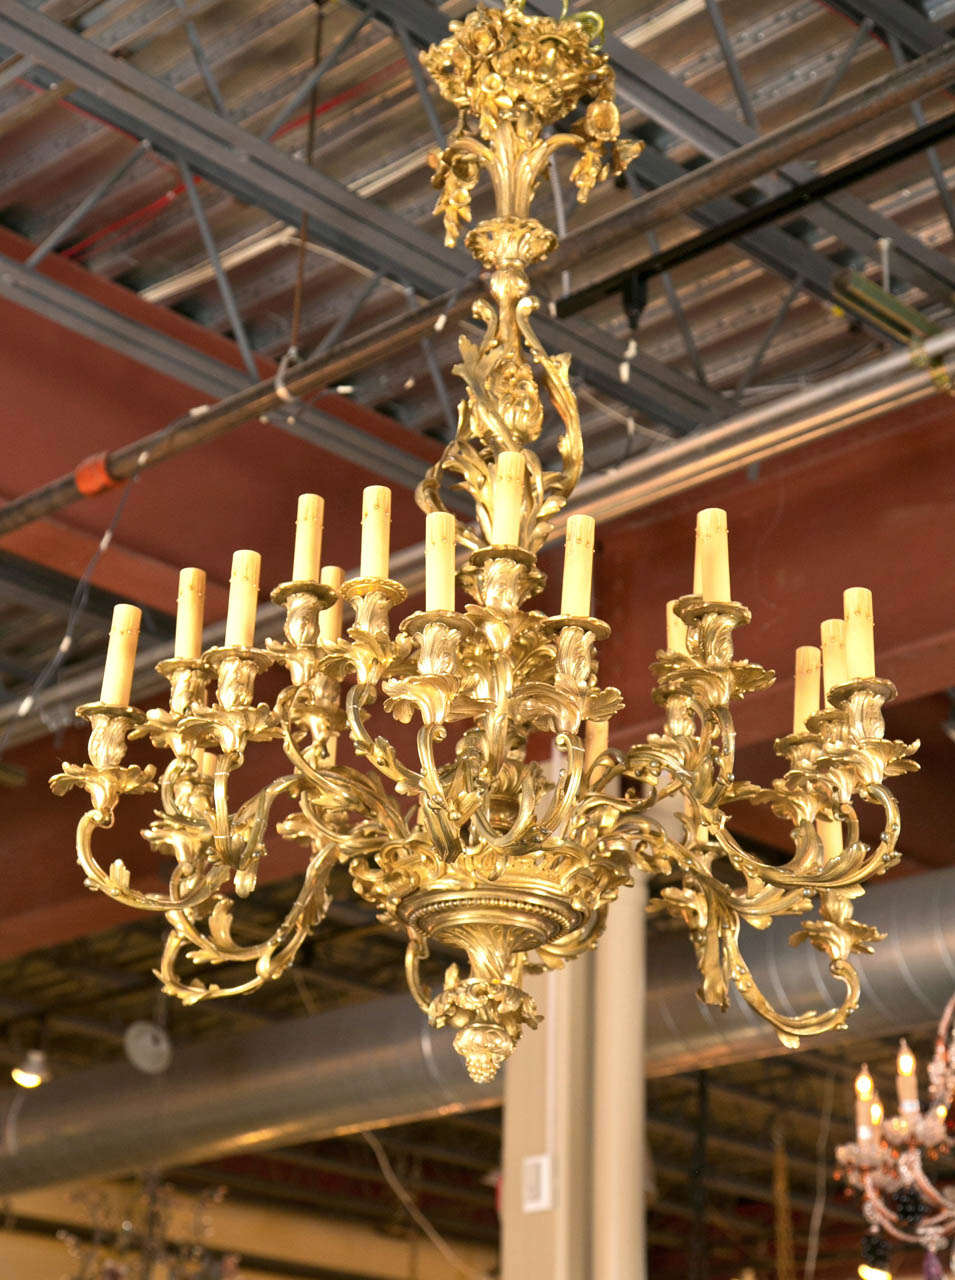 Gorgeous 1920's Bronze Rococo Chandelier - 24 Light.  Has been rewired.
Breath taking in all its beauty with rosettes, flowers, and vines swaying from limb to limb.  Attractive bronze work with a gold gilding.  Full of french elegance.  Ball